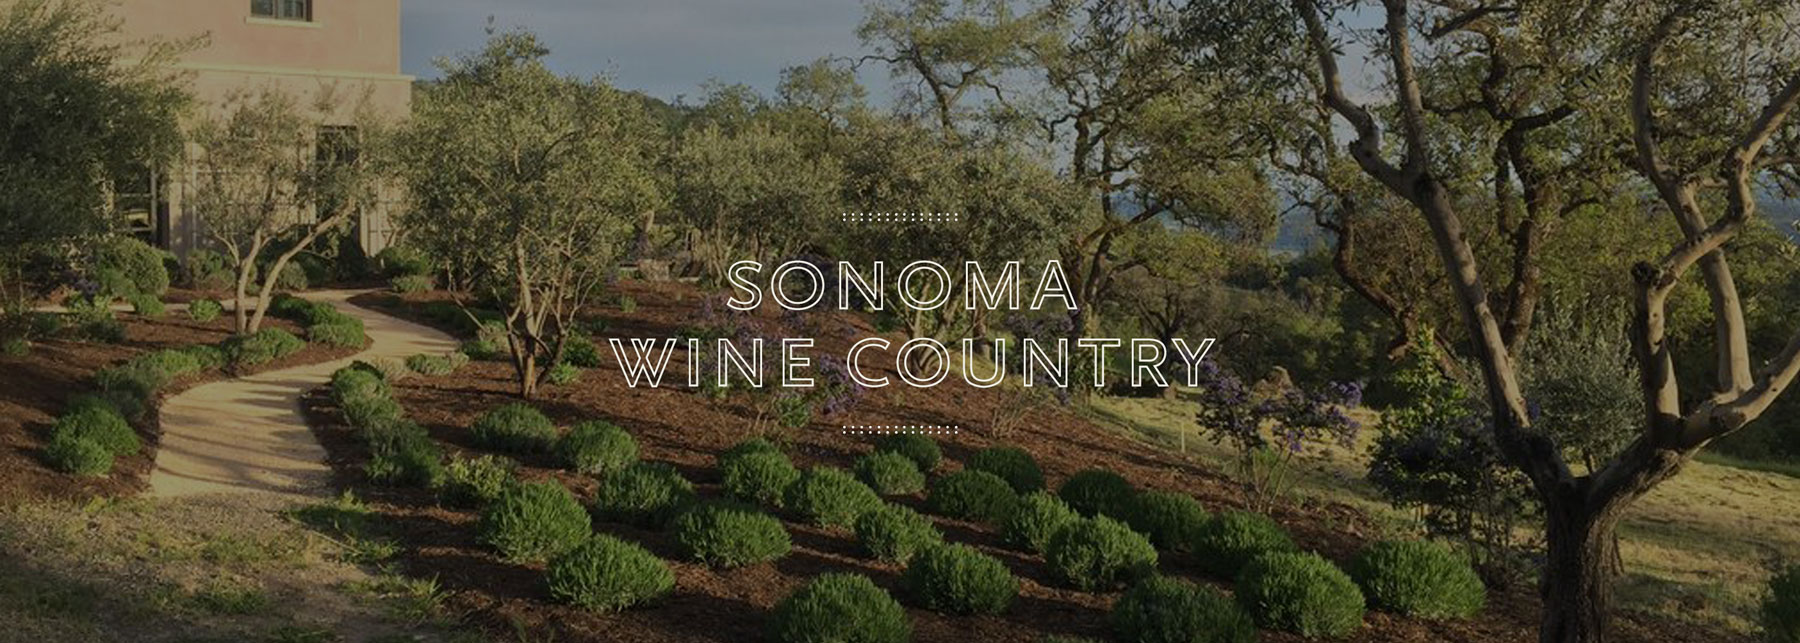 Sonoma Wine Country Culinary Tour